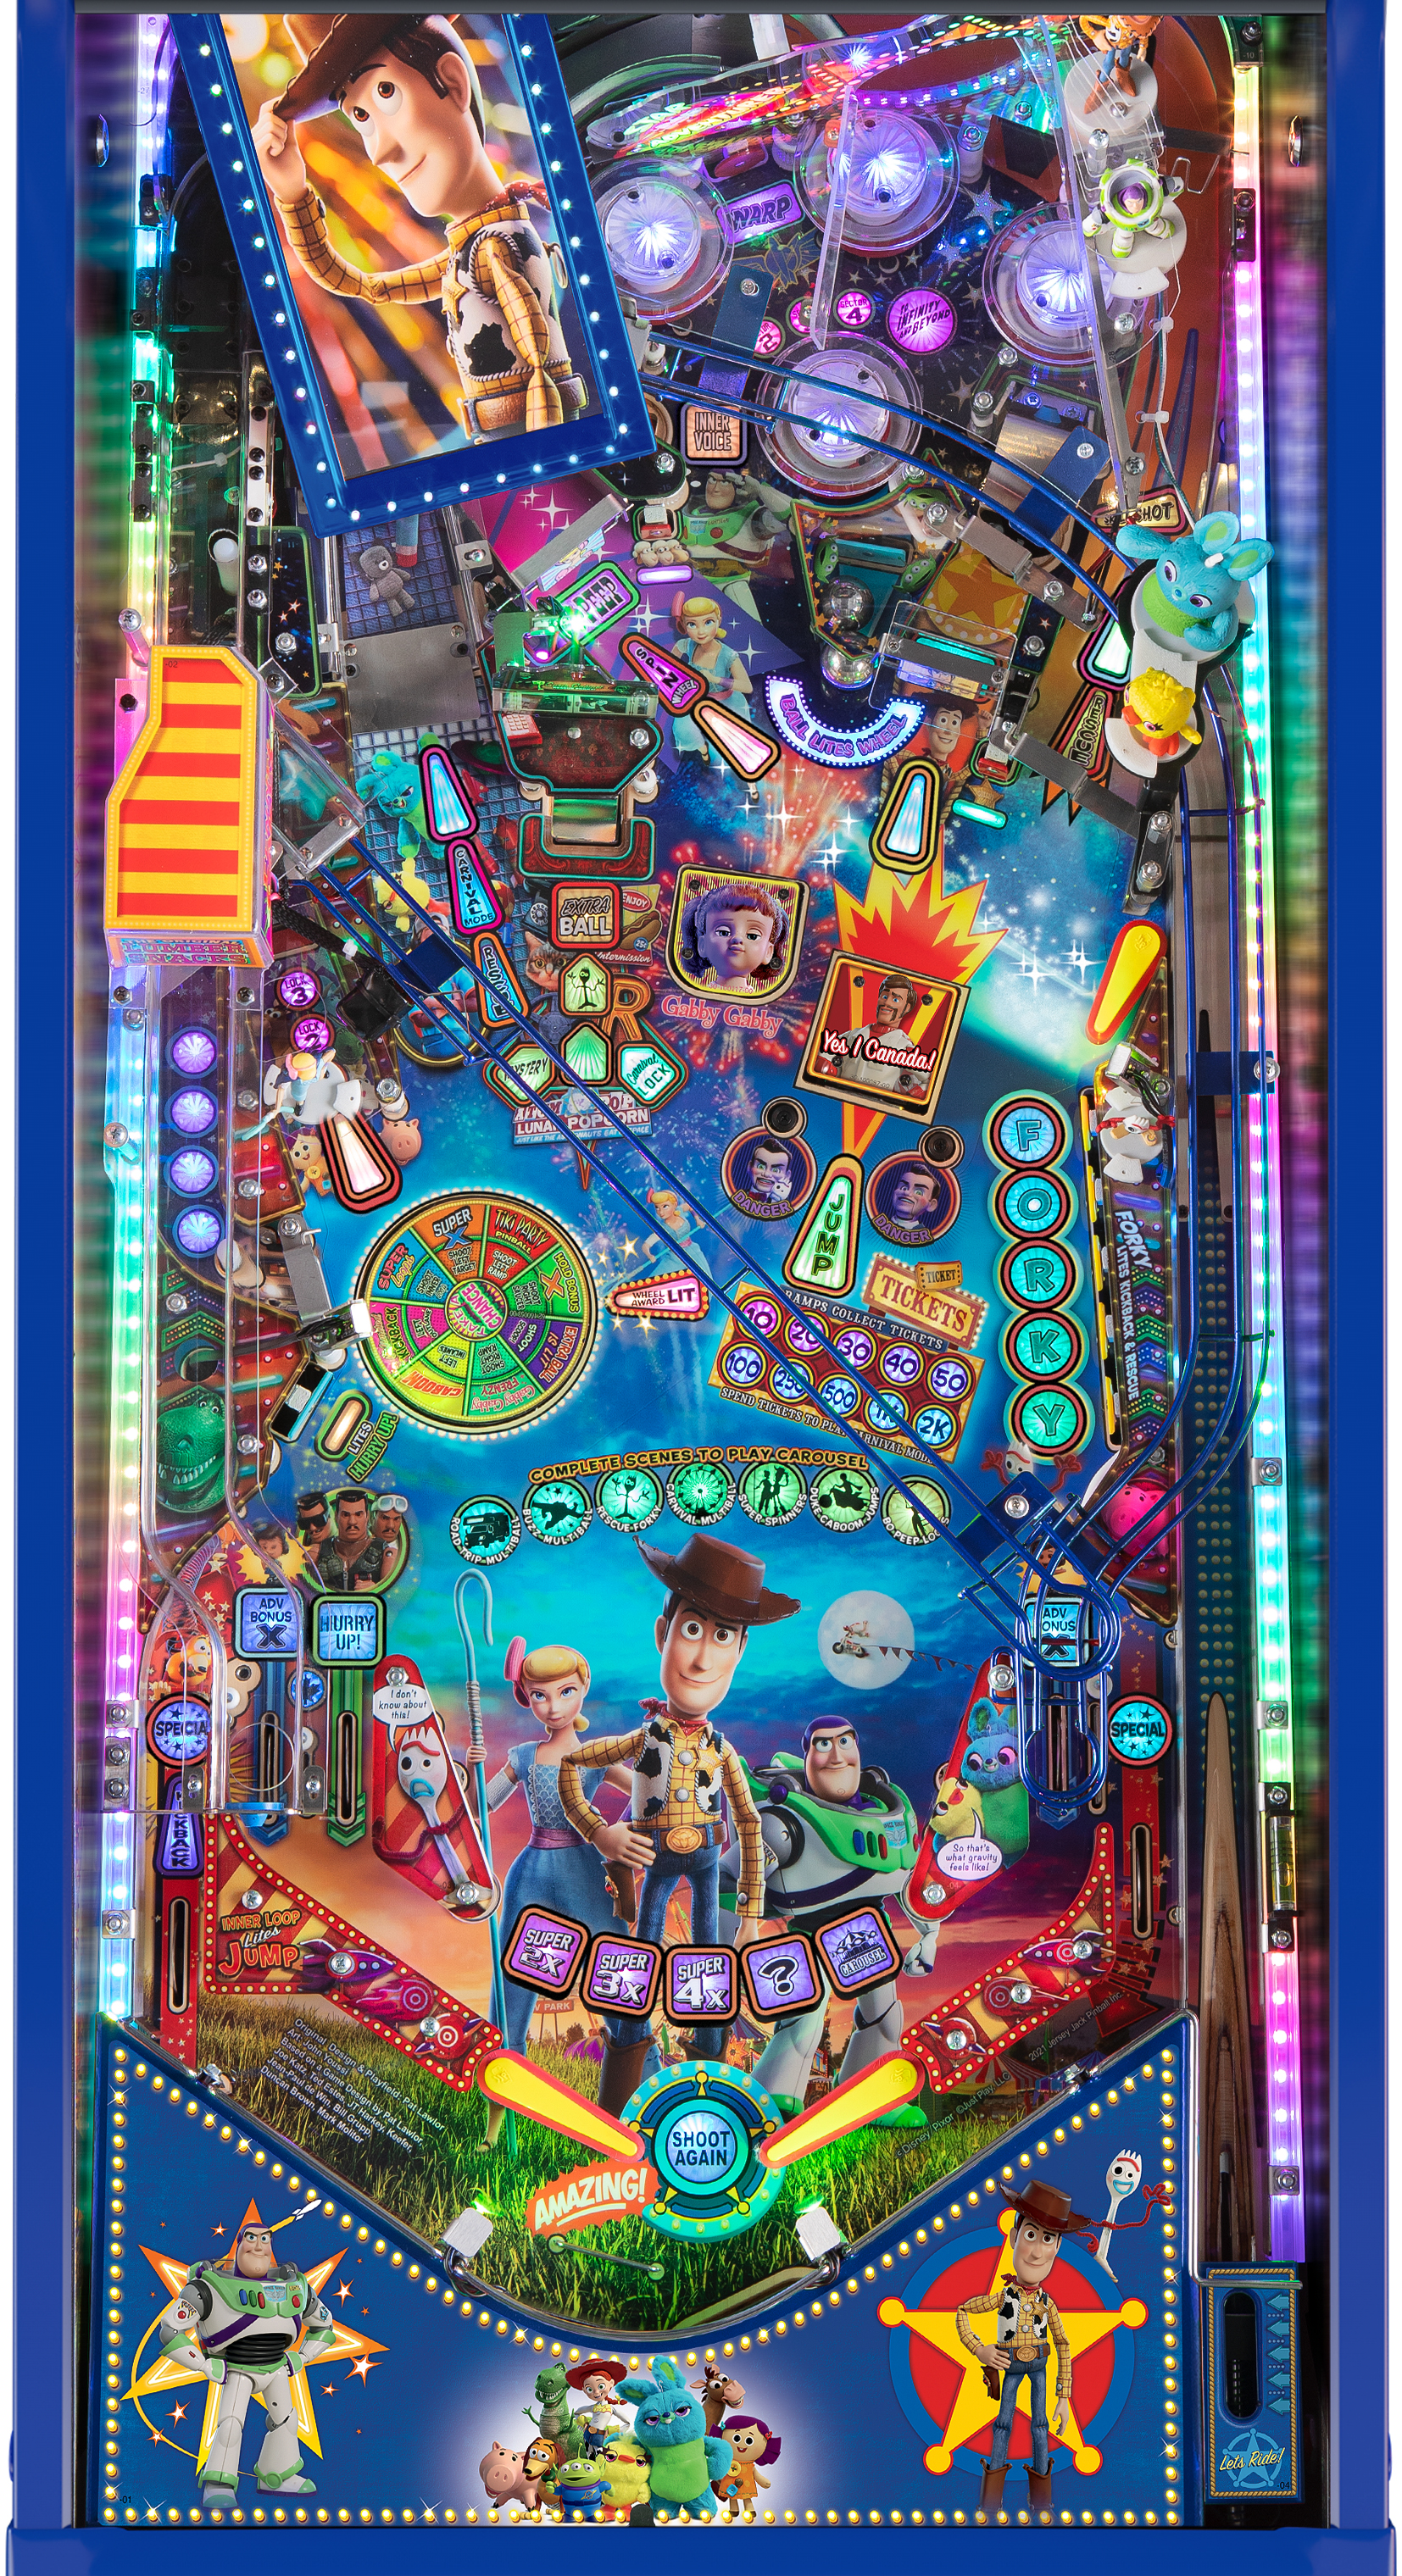 Jersey Jack Pinball reveals Toy Story 4, all details here